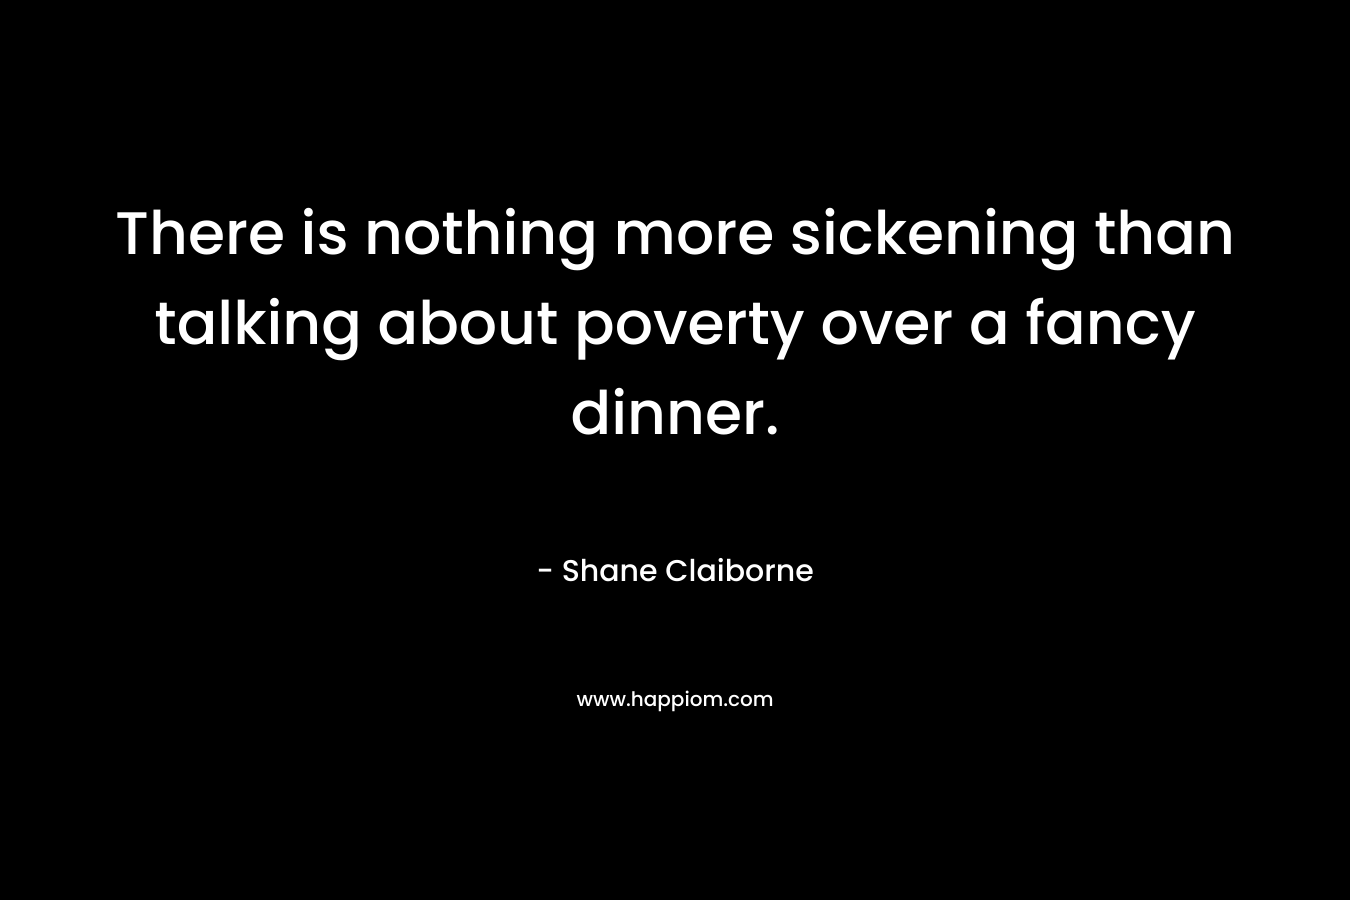 There is nothing more sickening than talking about poverty over a fancy dinner. – Shane Claiborne